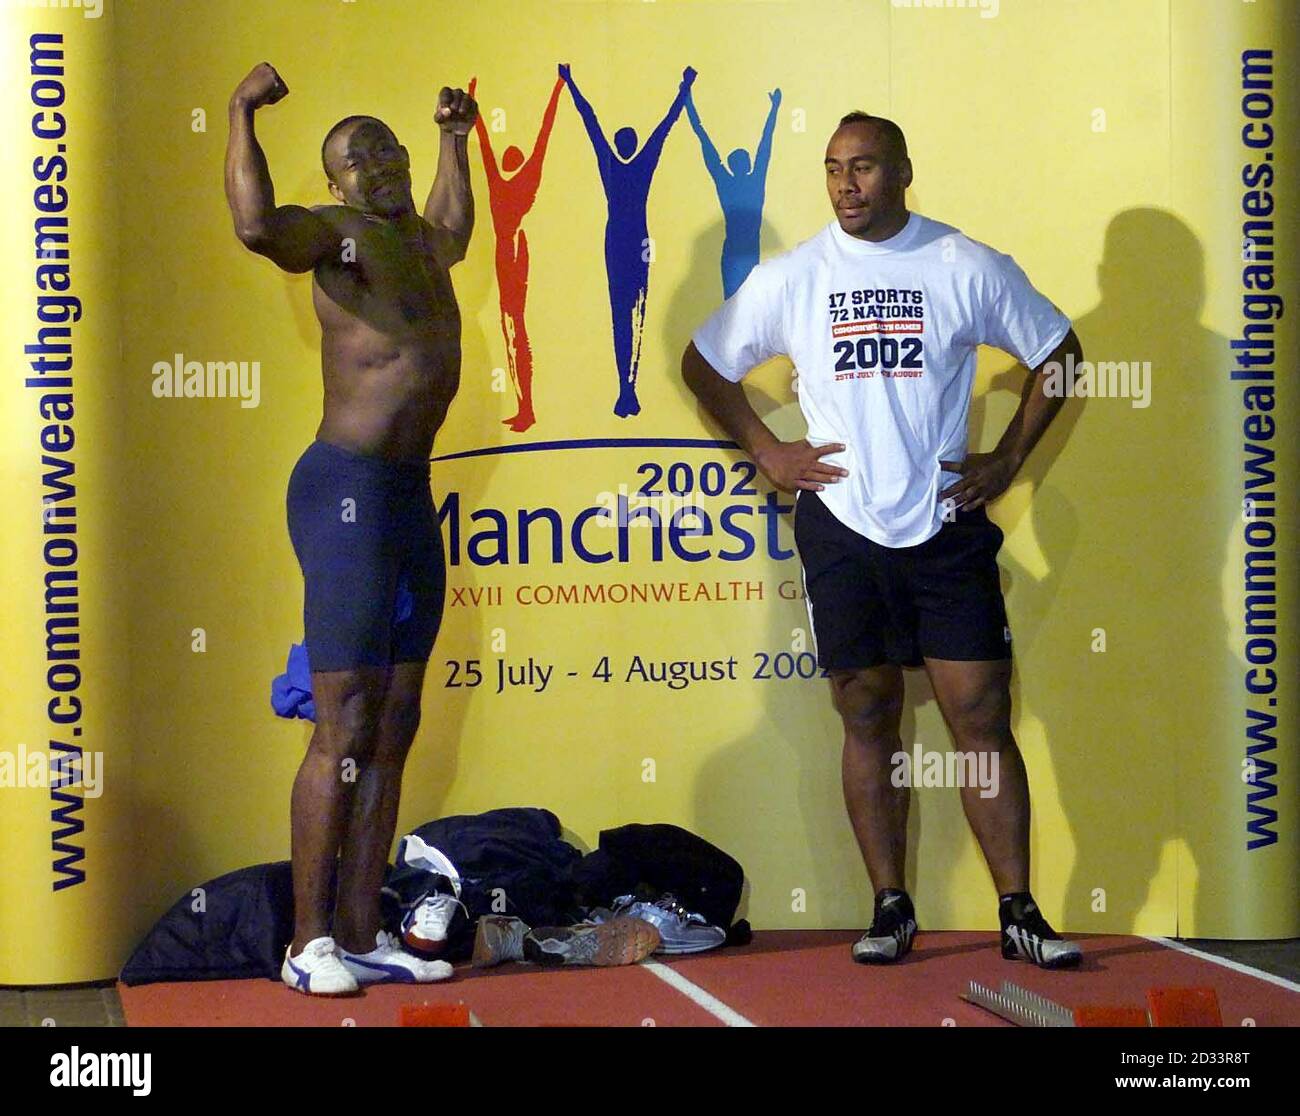 https://c8.alamy.com/comp/2D33R8T/linford-christie-flexes-his-muscles-as-jonah-lomu-r-looks-on-whilst-promoting-the-commonwealth-games-t-shirt-at-the-printworks-manchester-new-zealand-all-blacks-lomu-took-on-former-olympic-gold-medalist-christie-in-a-head-to-head-sprint-what-christie-won-as-part-of-the-countdown-towards-the-2002-commonwealth-games-2D33R8T.jpg